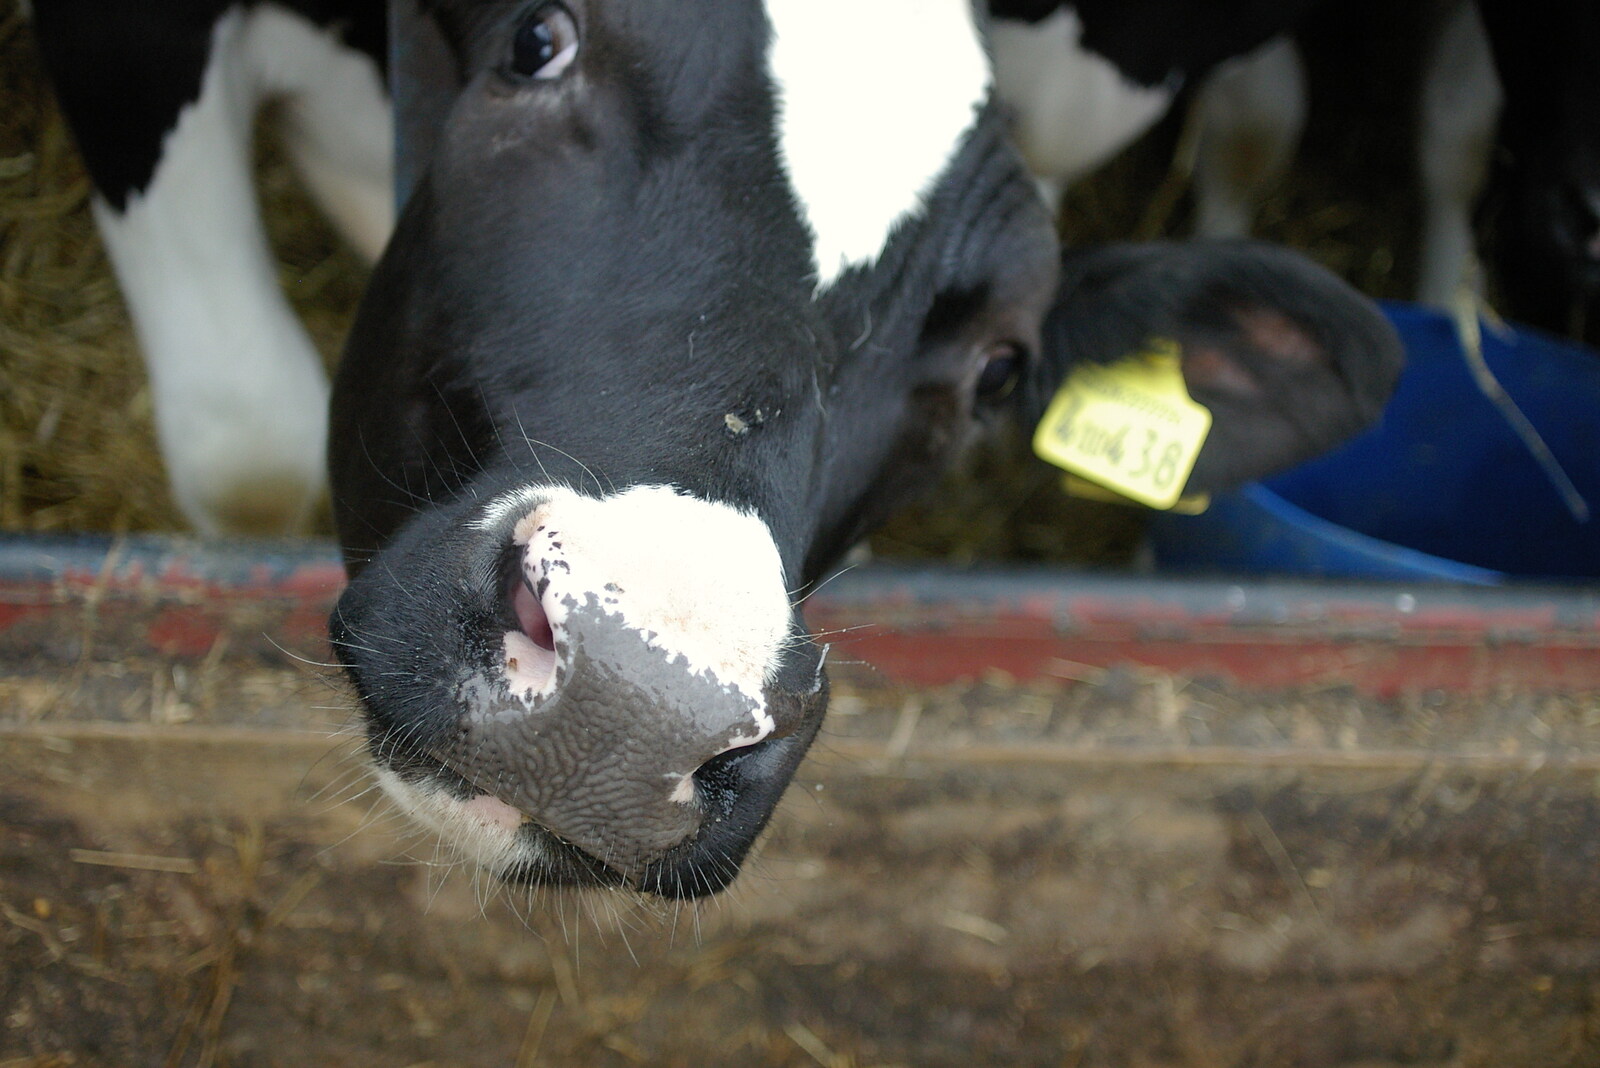 A curious Fresian bullock peers out from his stall from Wavy and the Milking Room, Dairy Farm, Thrandeston, Suffolk - 28th March 2005